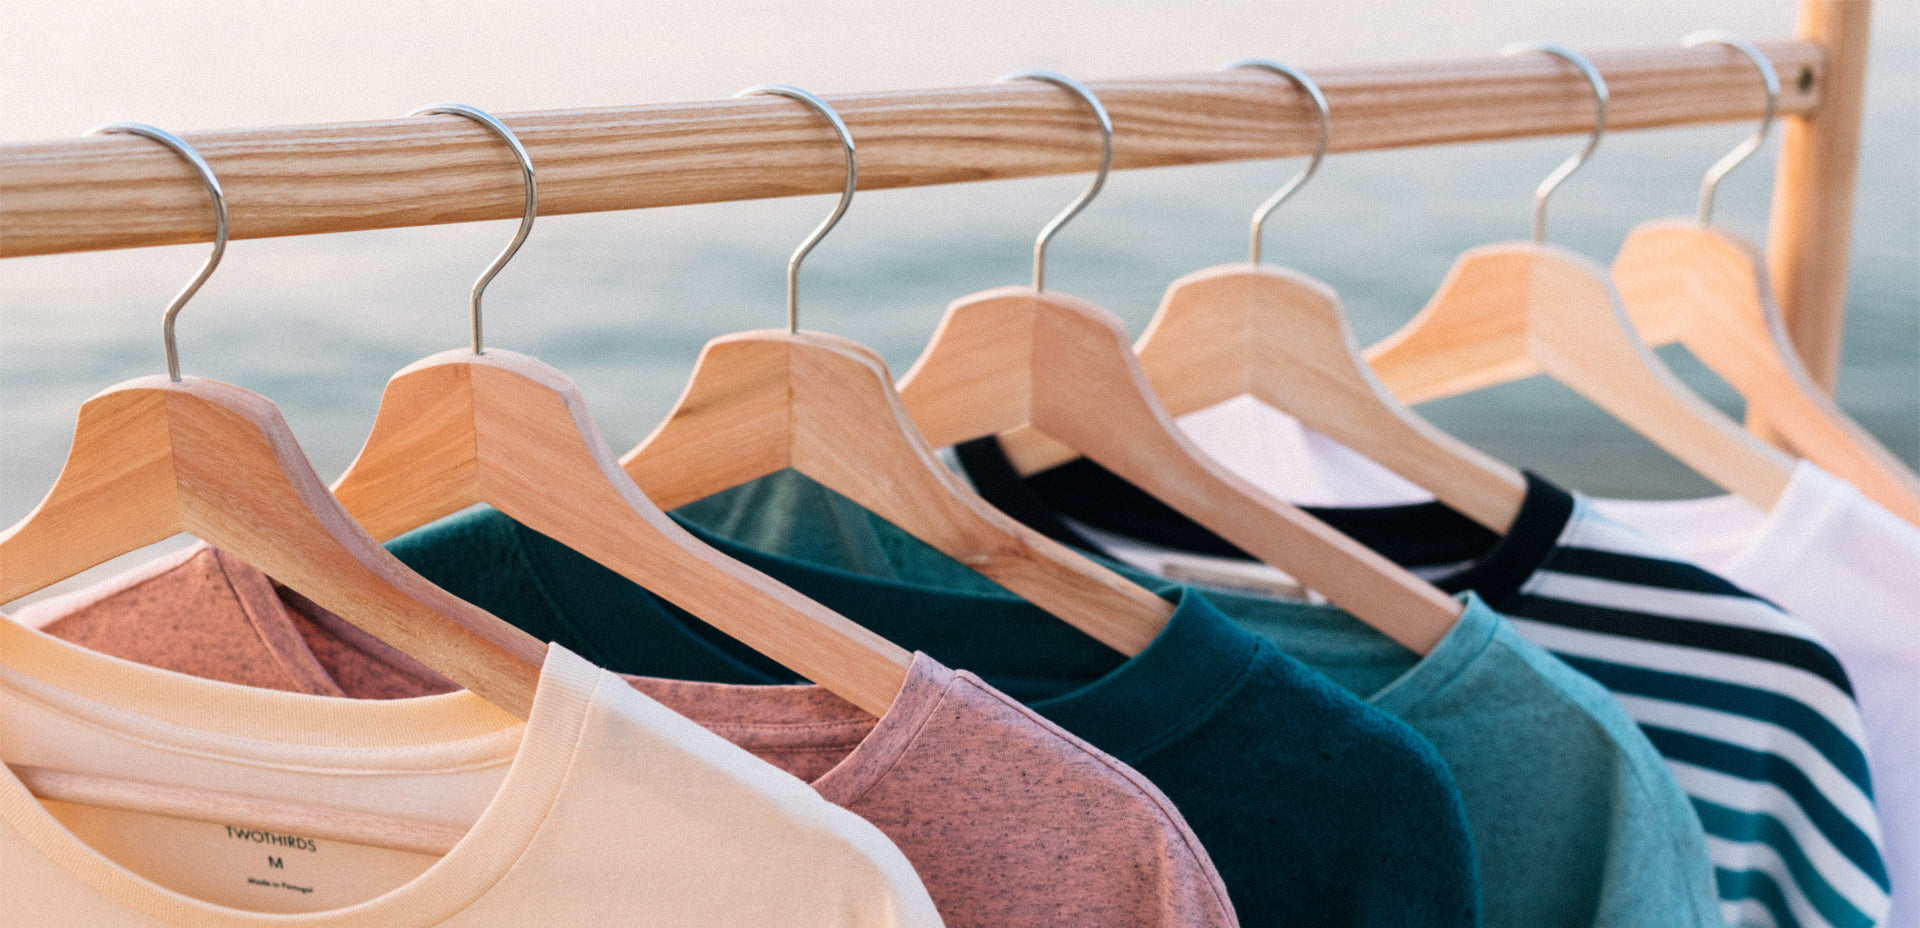 Think Twice: The Frightening Fallout From Fast Fashion Sales – TWOTHIRDS